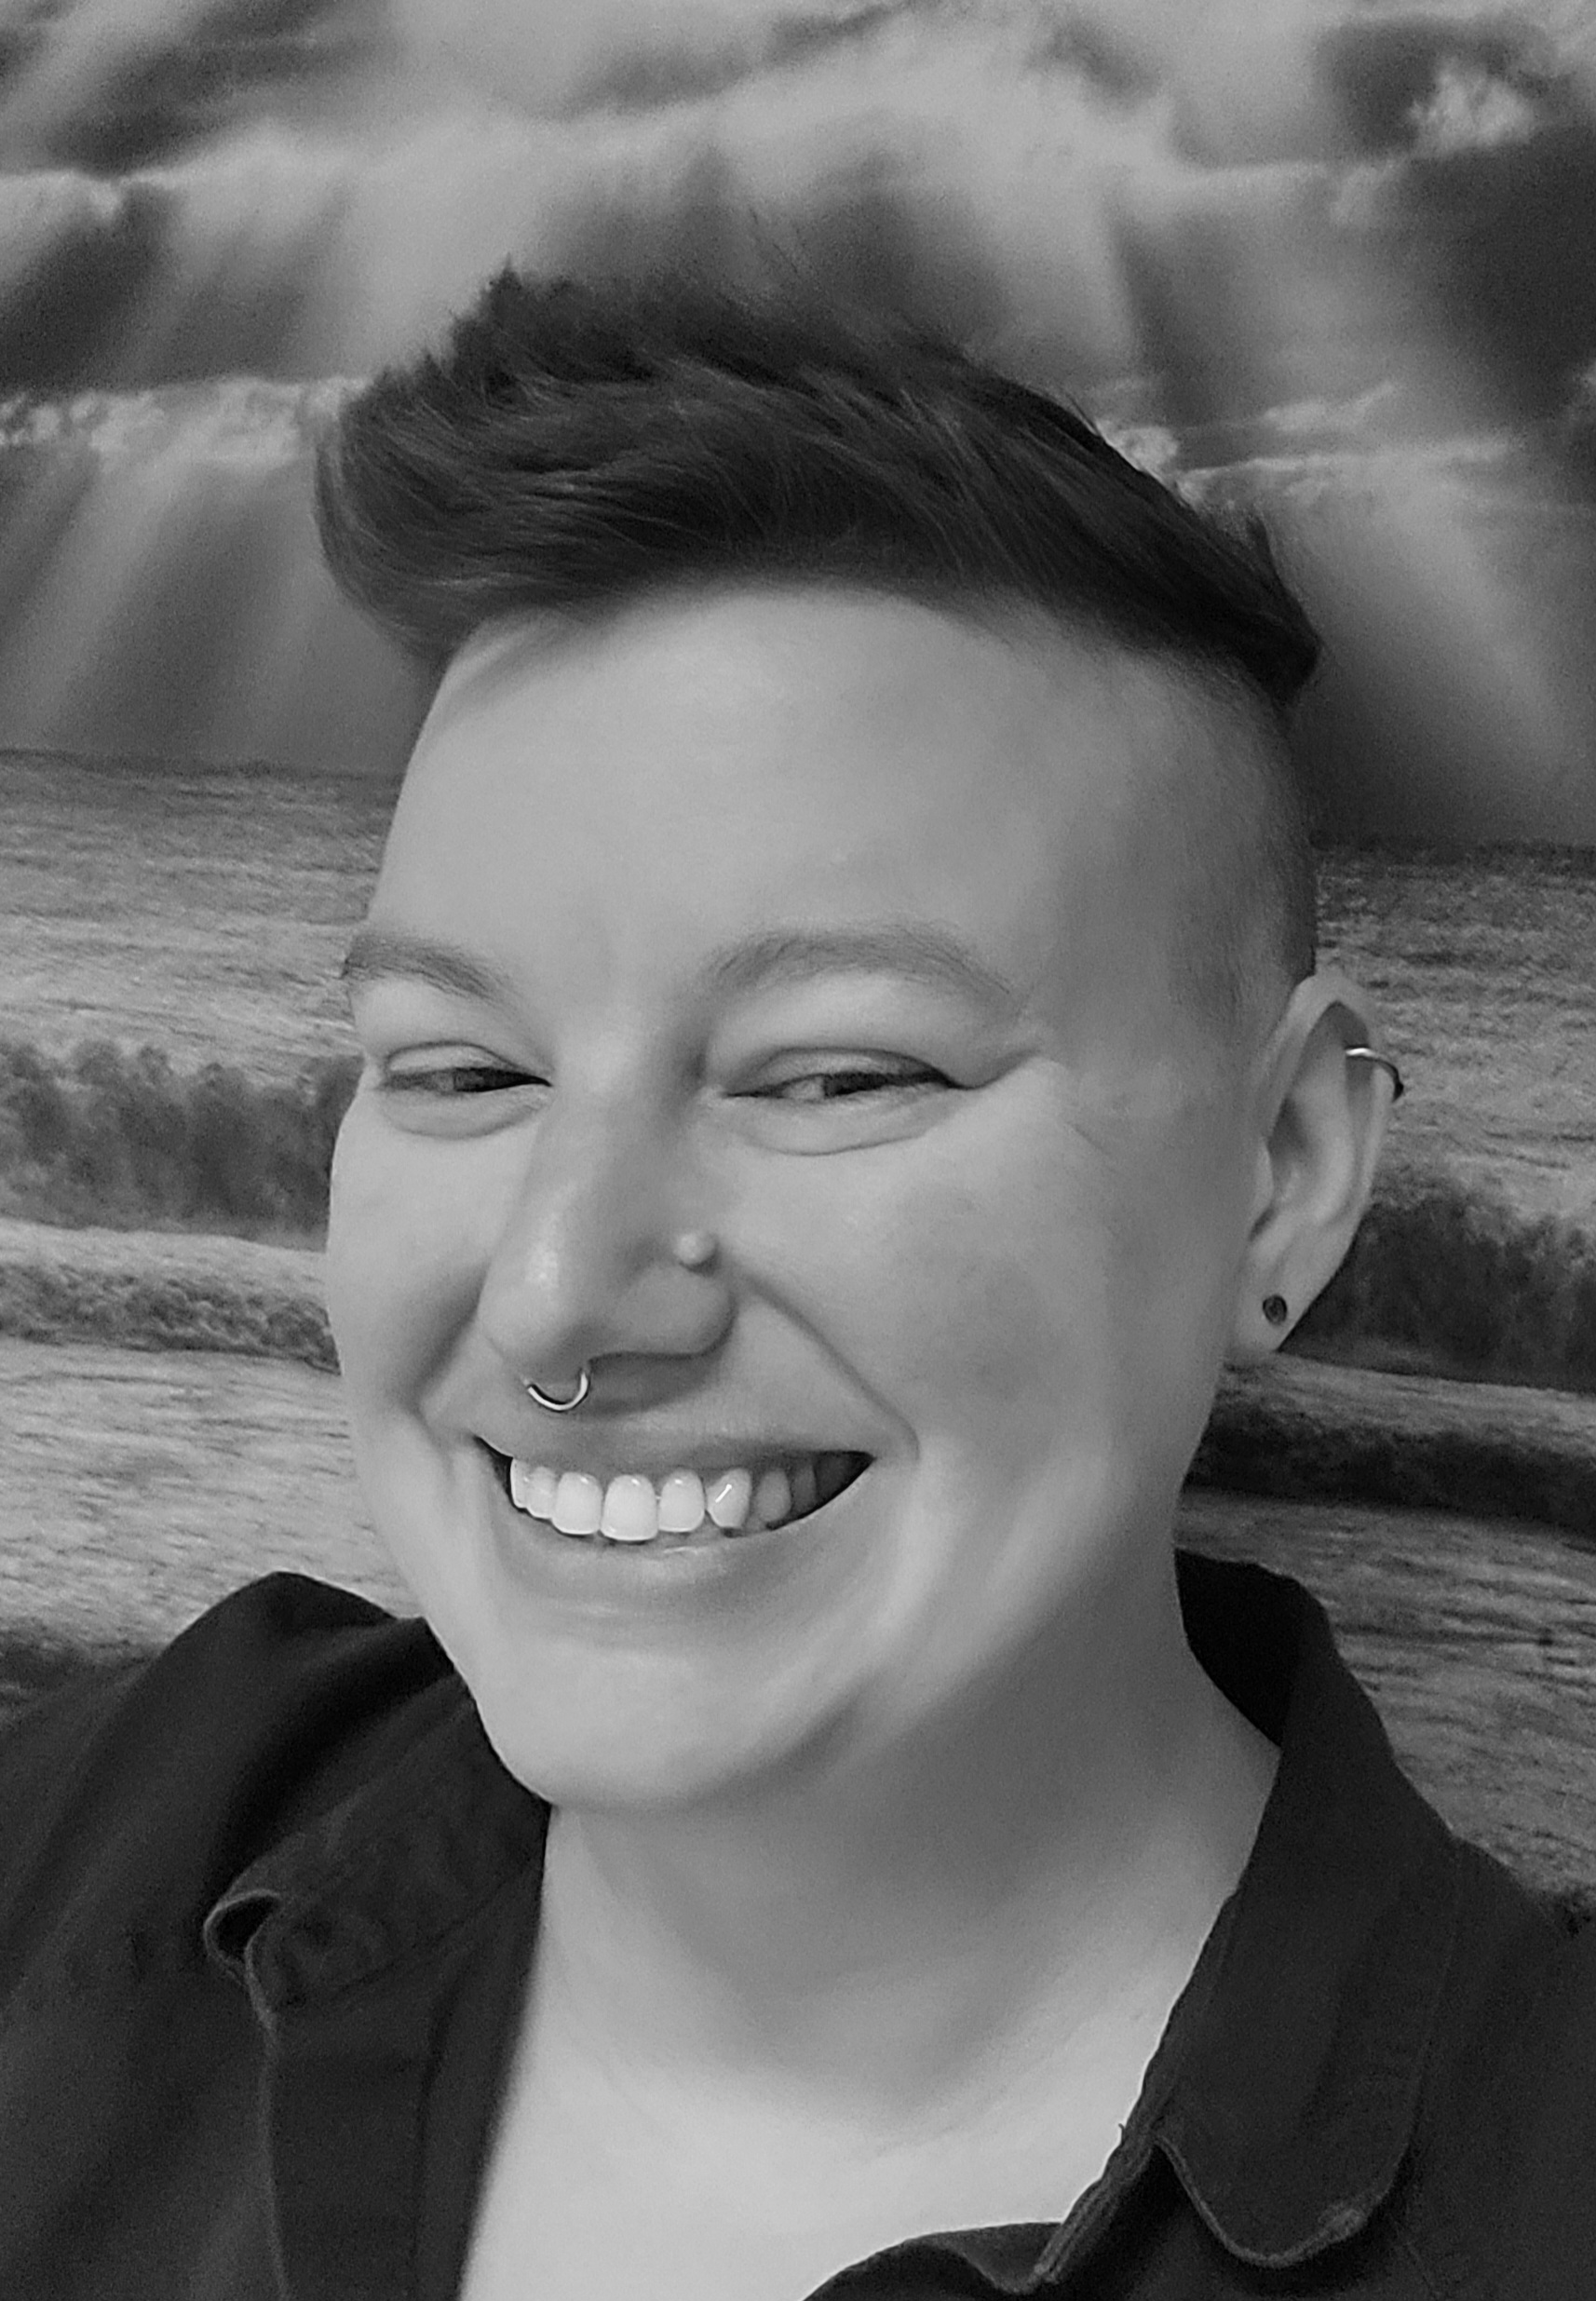 Heidi is a twenty something caucasian person with dark hair that is a few inches long on top and shaved on the sides. They are wearing a dark collared shirt and are leaning against a landscape picture of a beach scene while smiling. They have a septum piercing and two ear piercings.